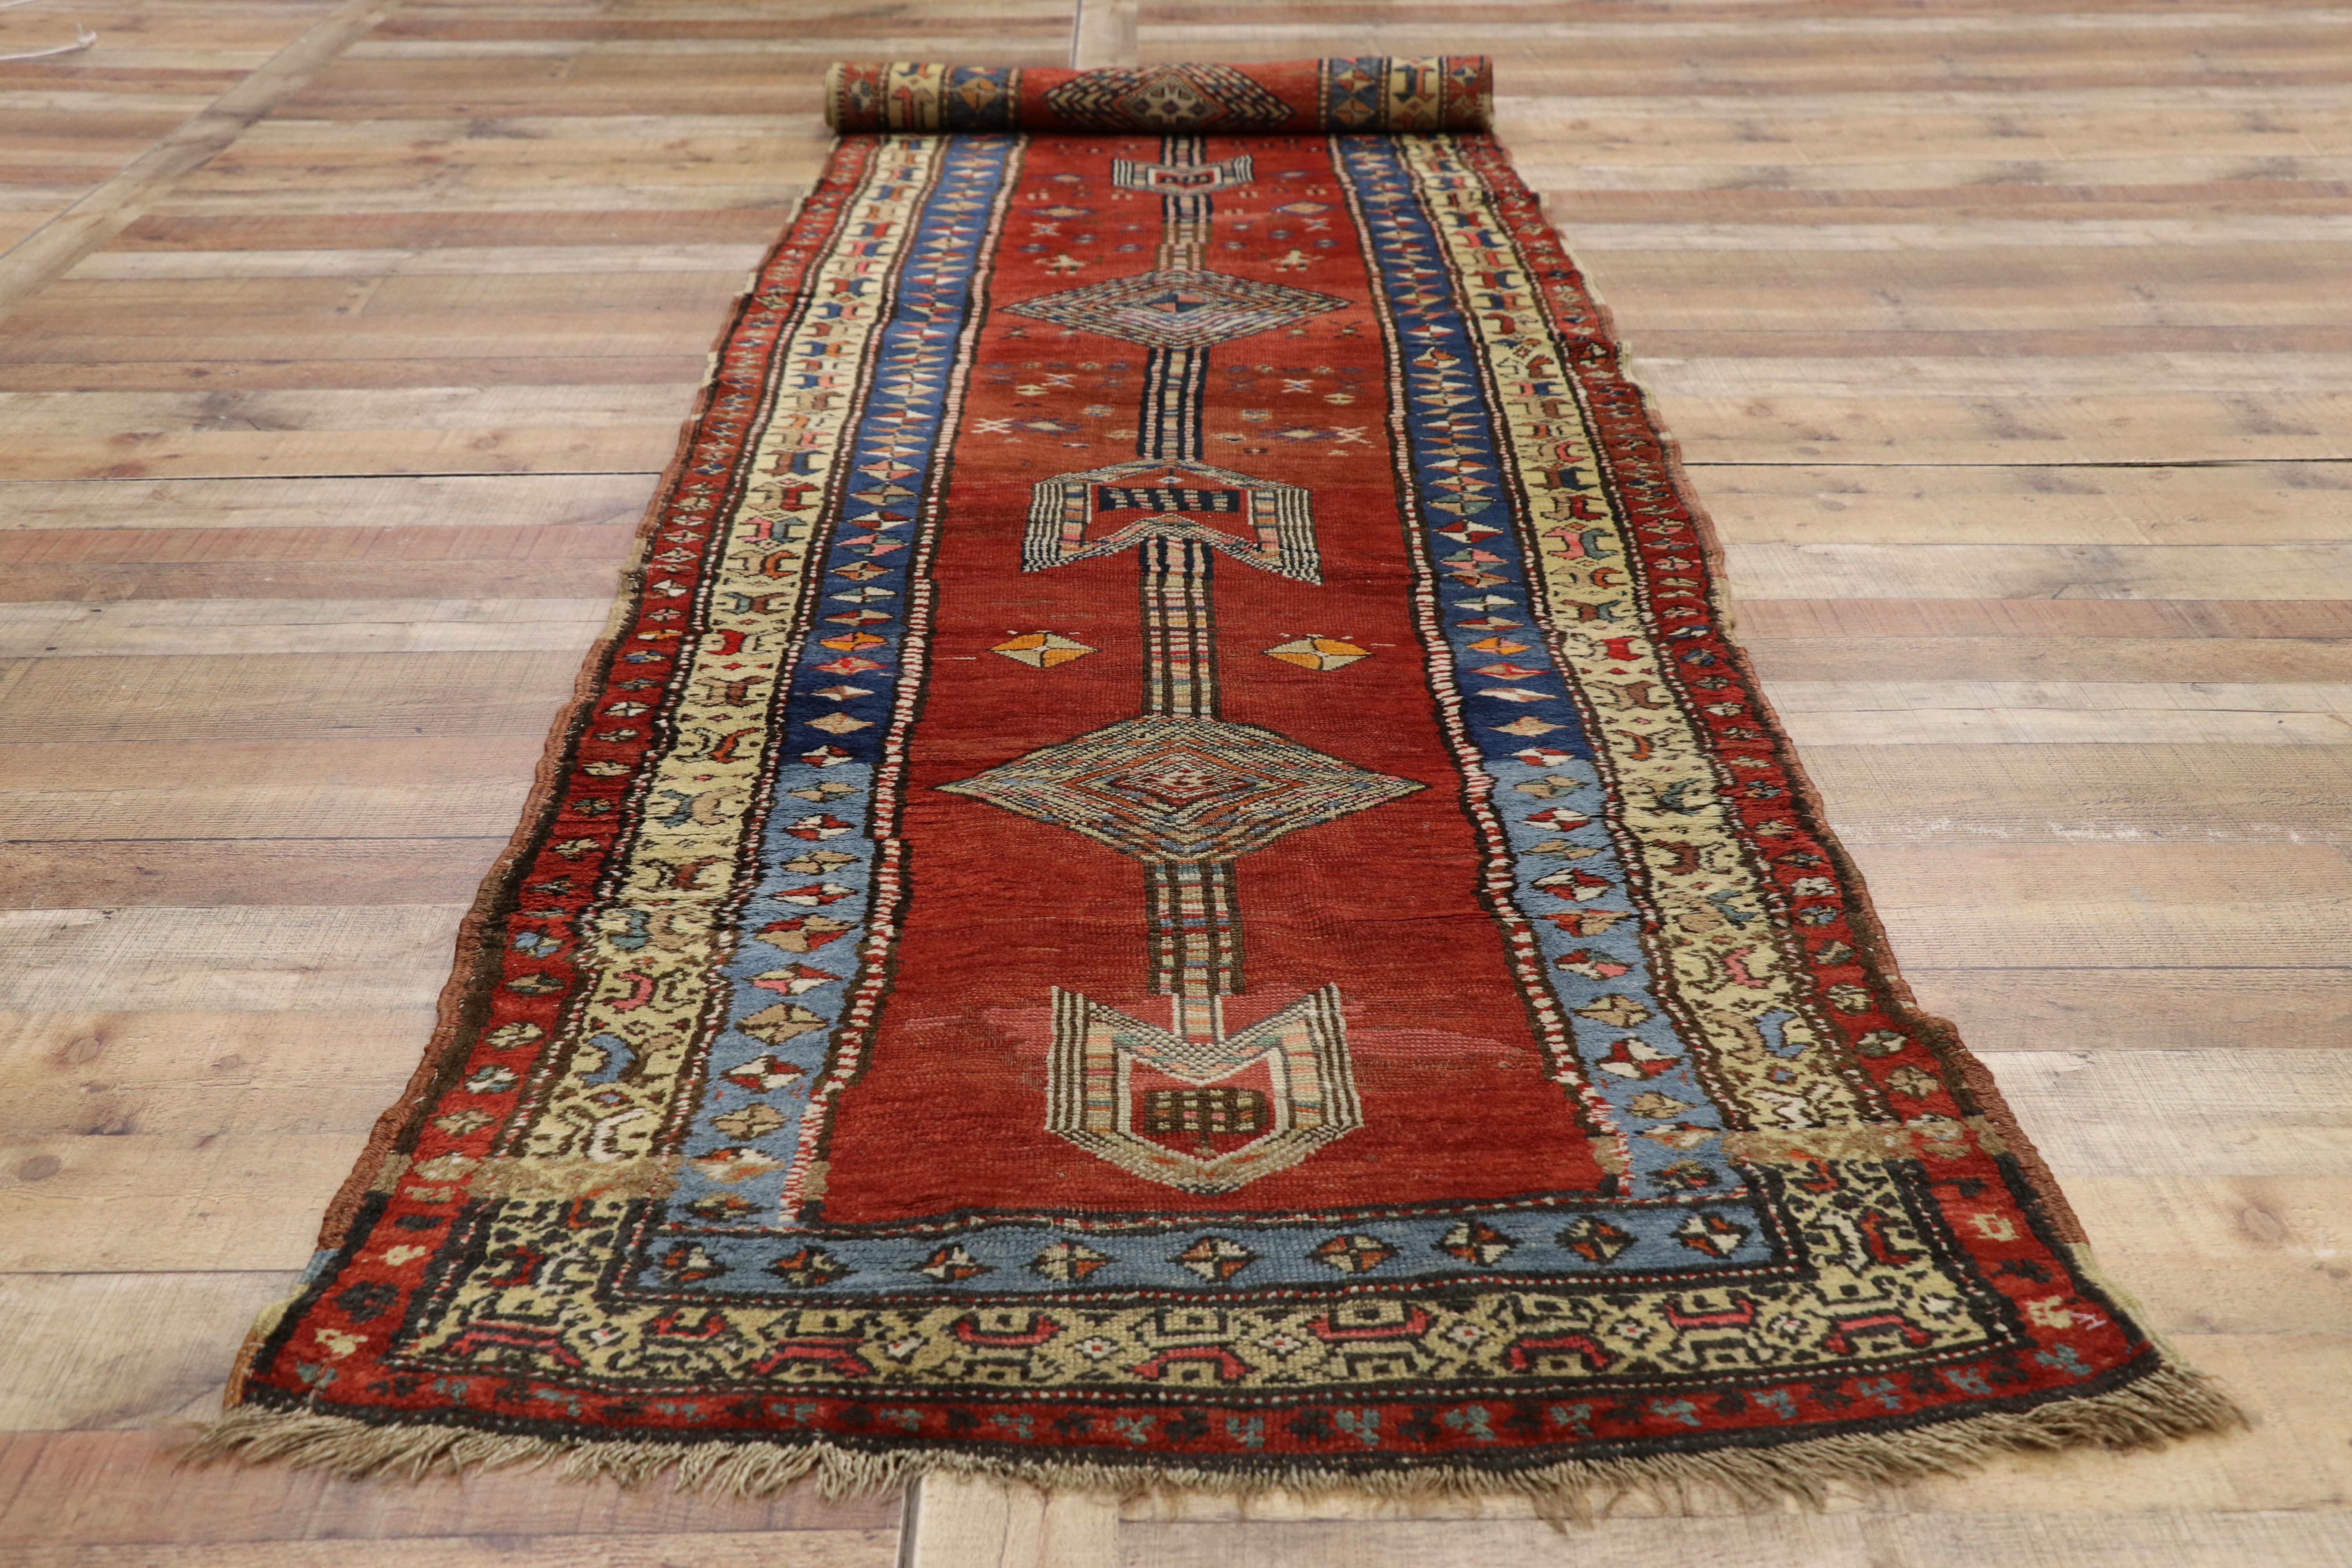 Antique Persian Sarab Runner with Mid-Century Modern Tribal Style 1